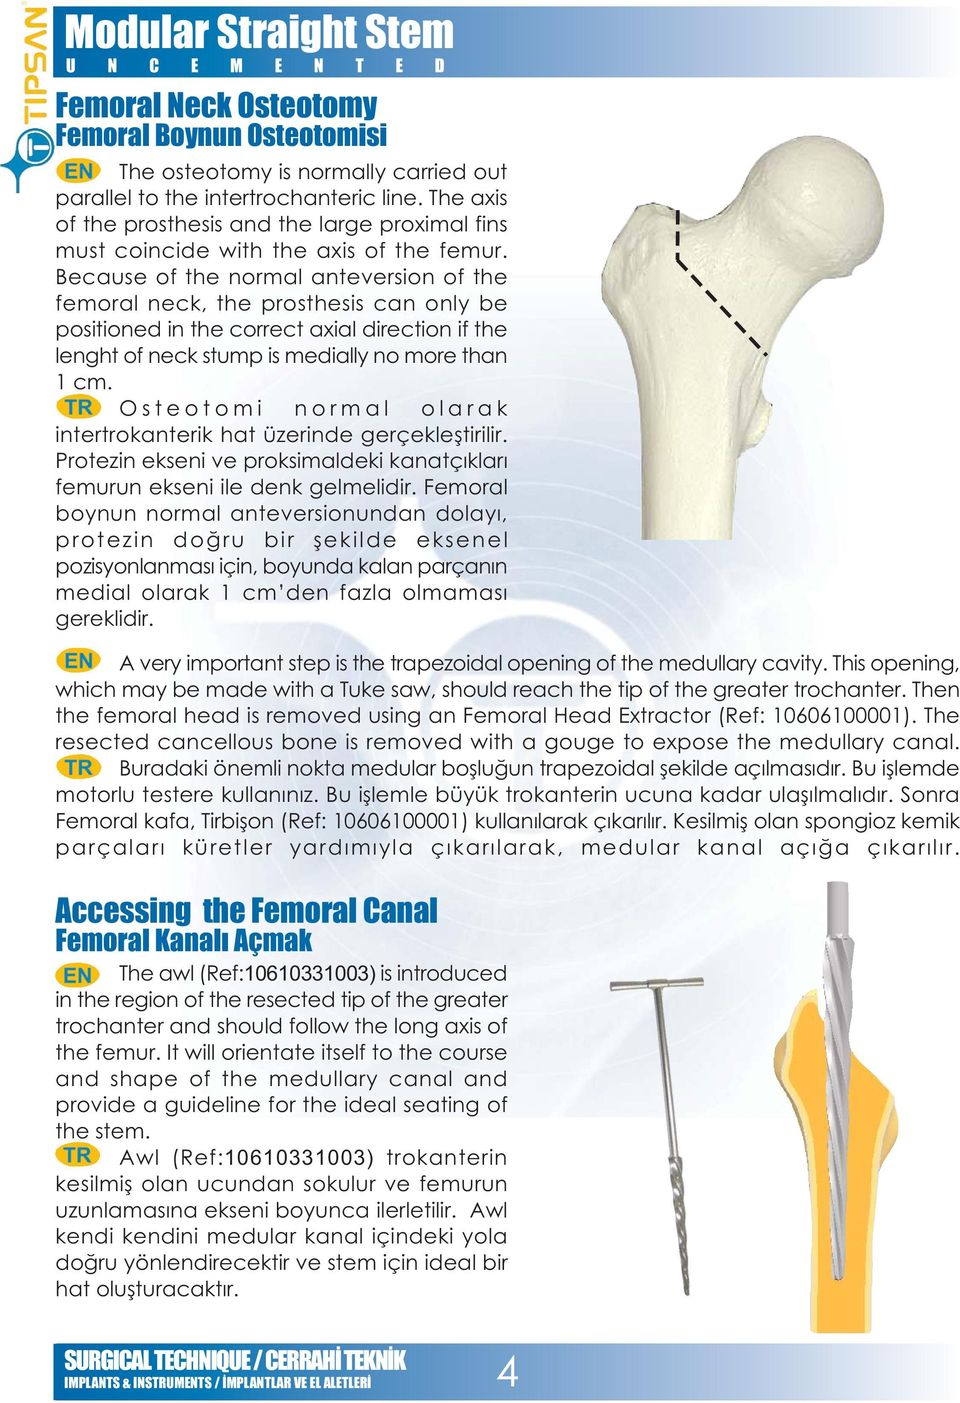 Because of the normal anteversion of the femoral neck, the prosthesis can only be positioned in the correct axial direction if the lenght of neck stump is medially no more than 1 cm.